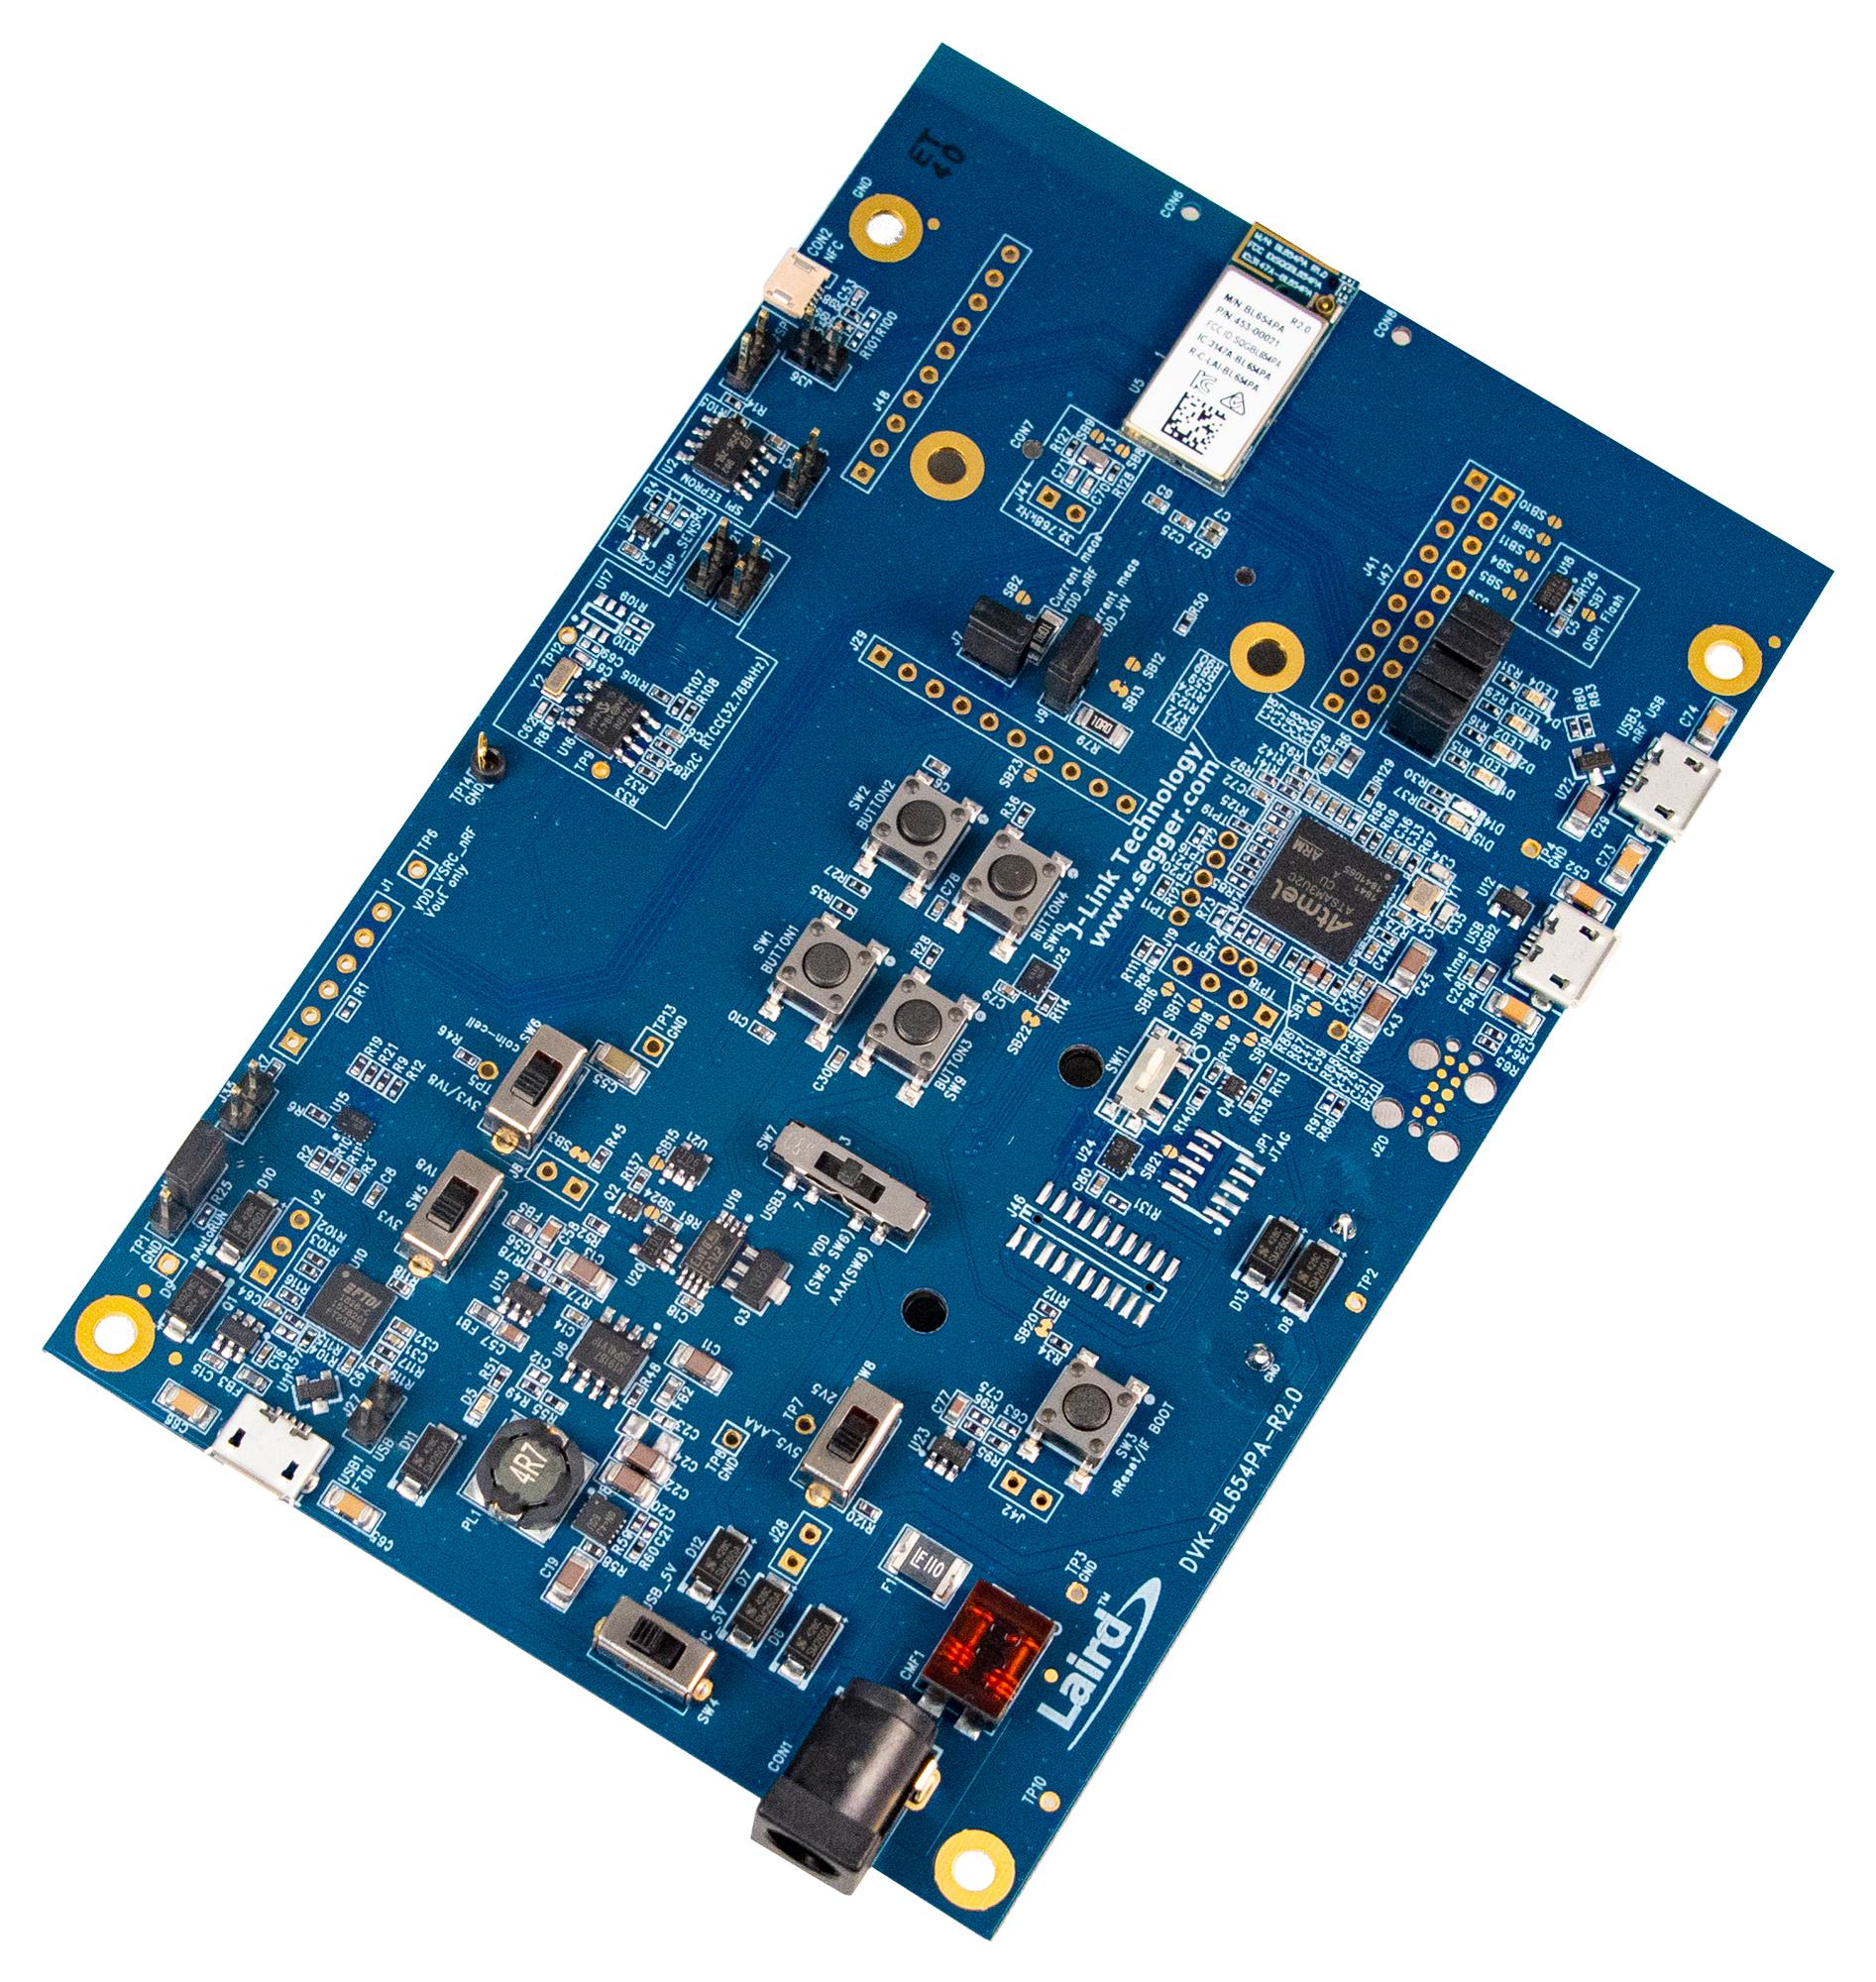 455-00023 DEV KIT, BLUETOOTH LOW ENERGY/NFC LAIRD CONNECTIVITY